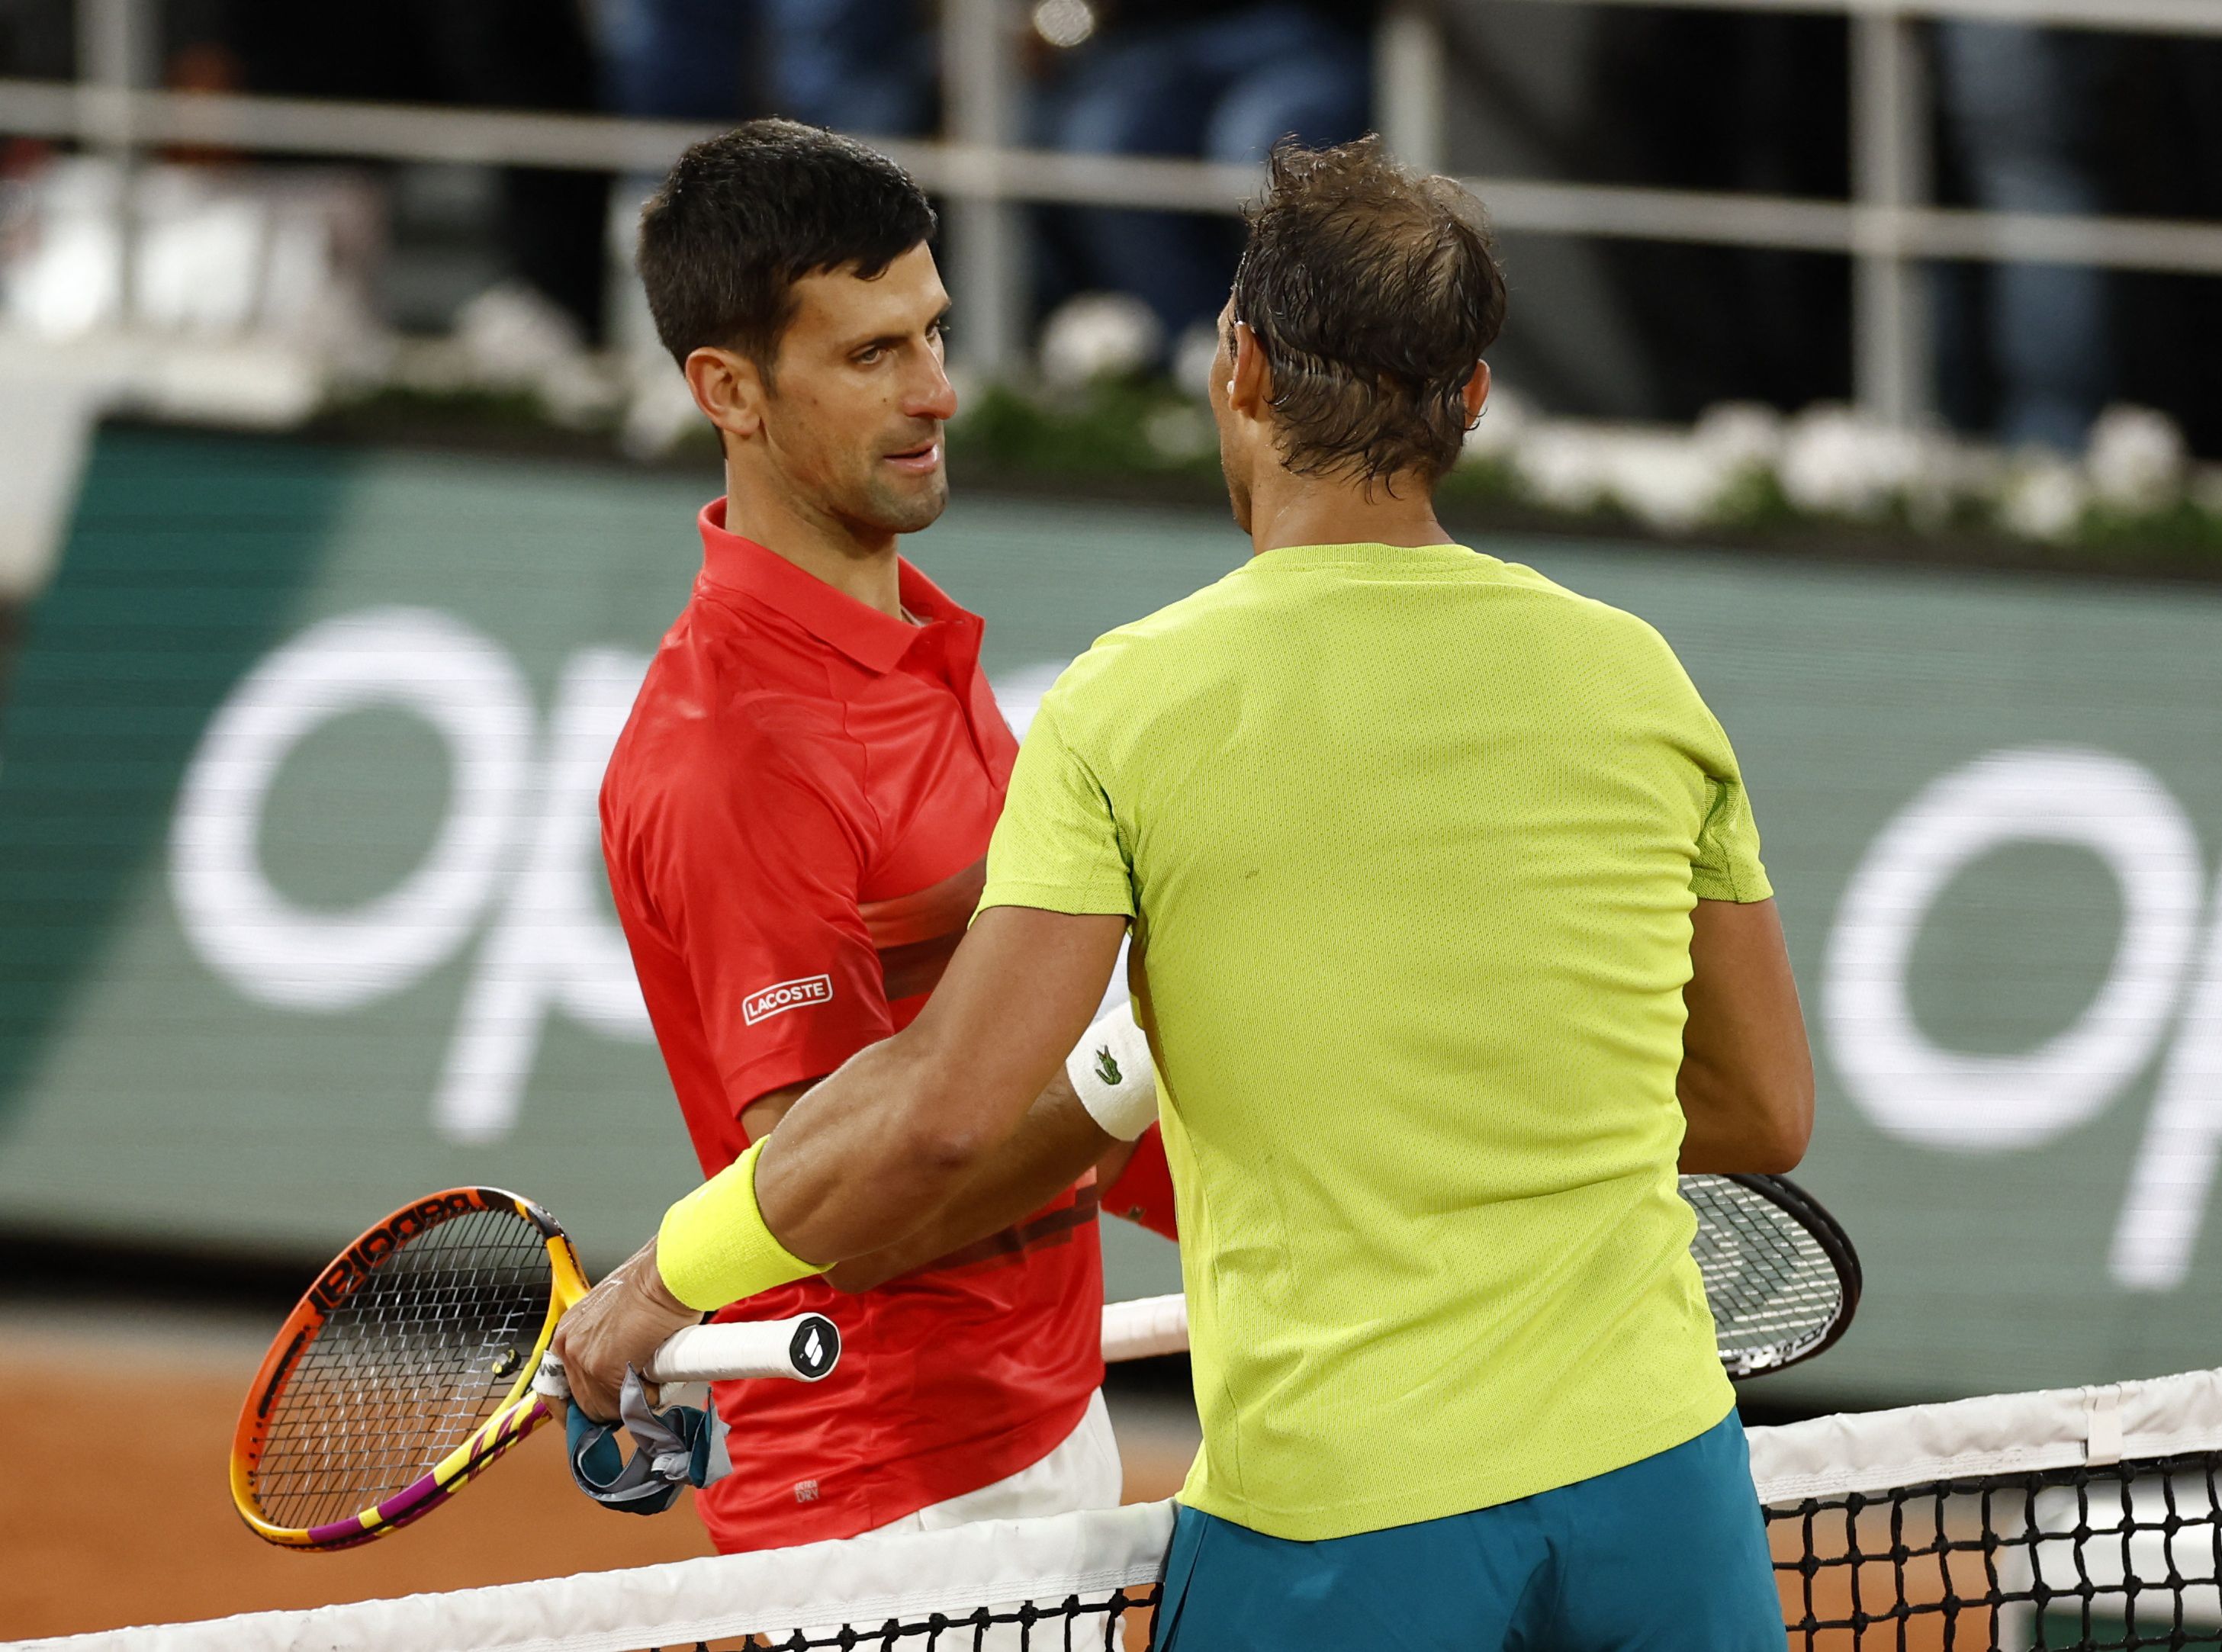 Had my chances but lost to a better player, says Djokovic Reuters